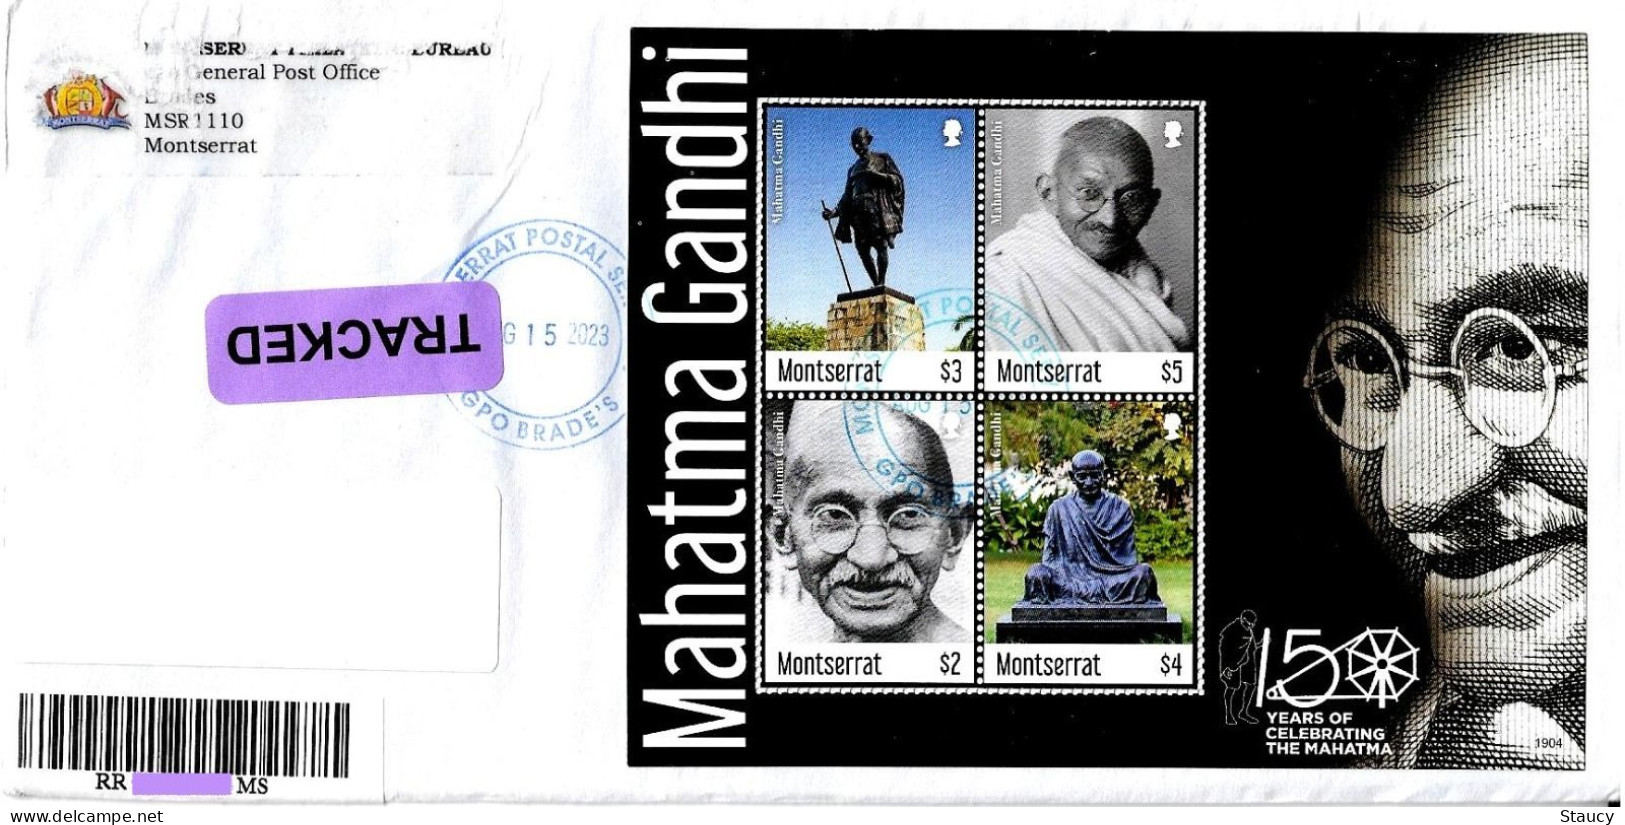 Montserrat 2019 - 150th Anni Mahatma Gandhi - Collection 2 FDCs + 2 perf / 2 imperf Sheets + 5 Die Cards + 2 Regd.Covers